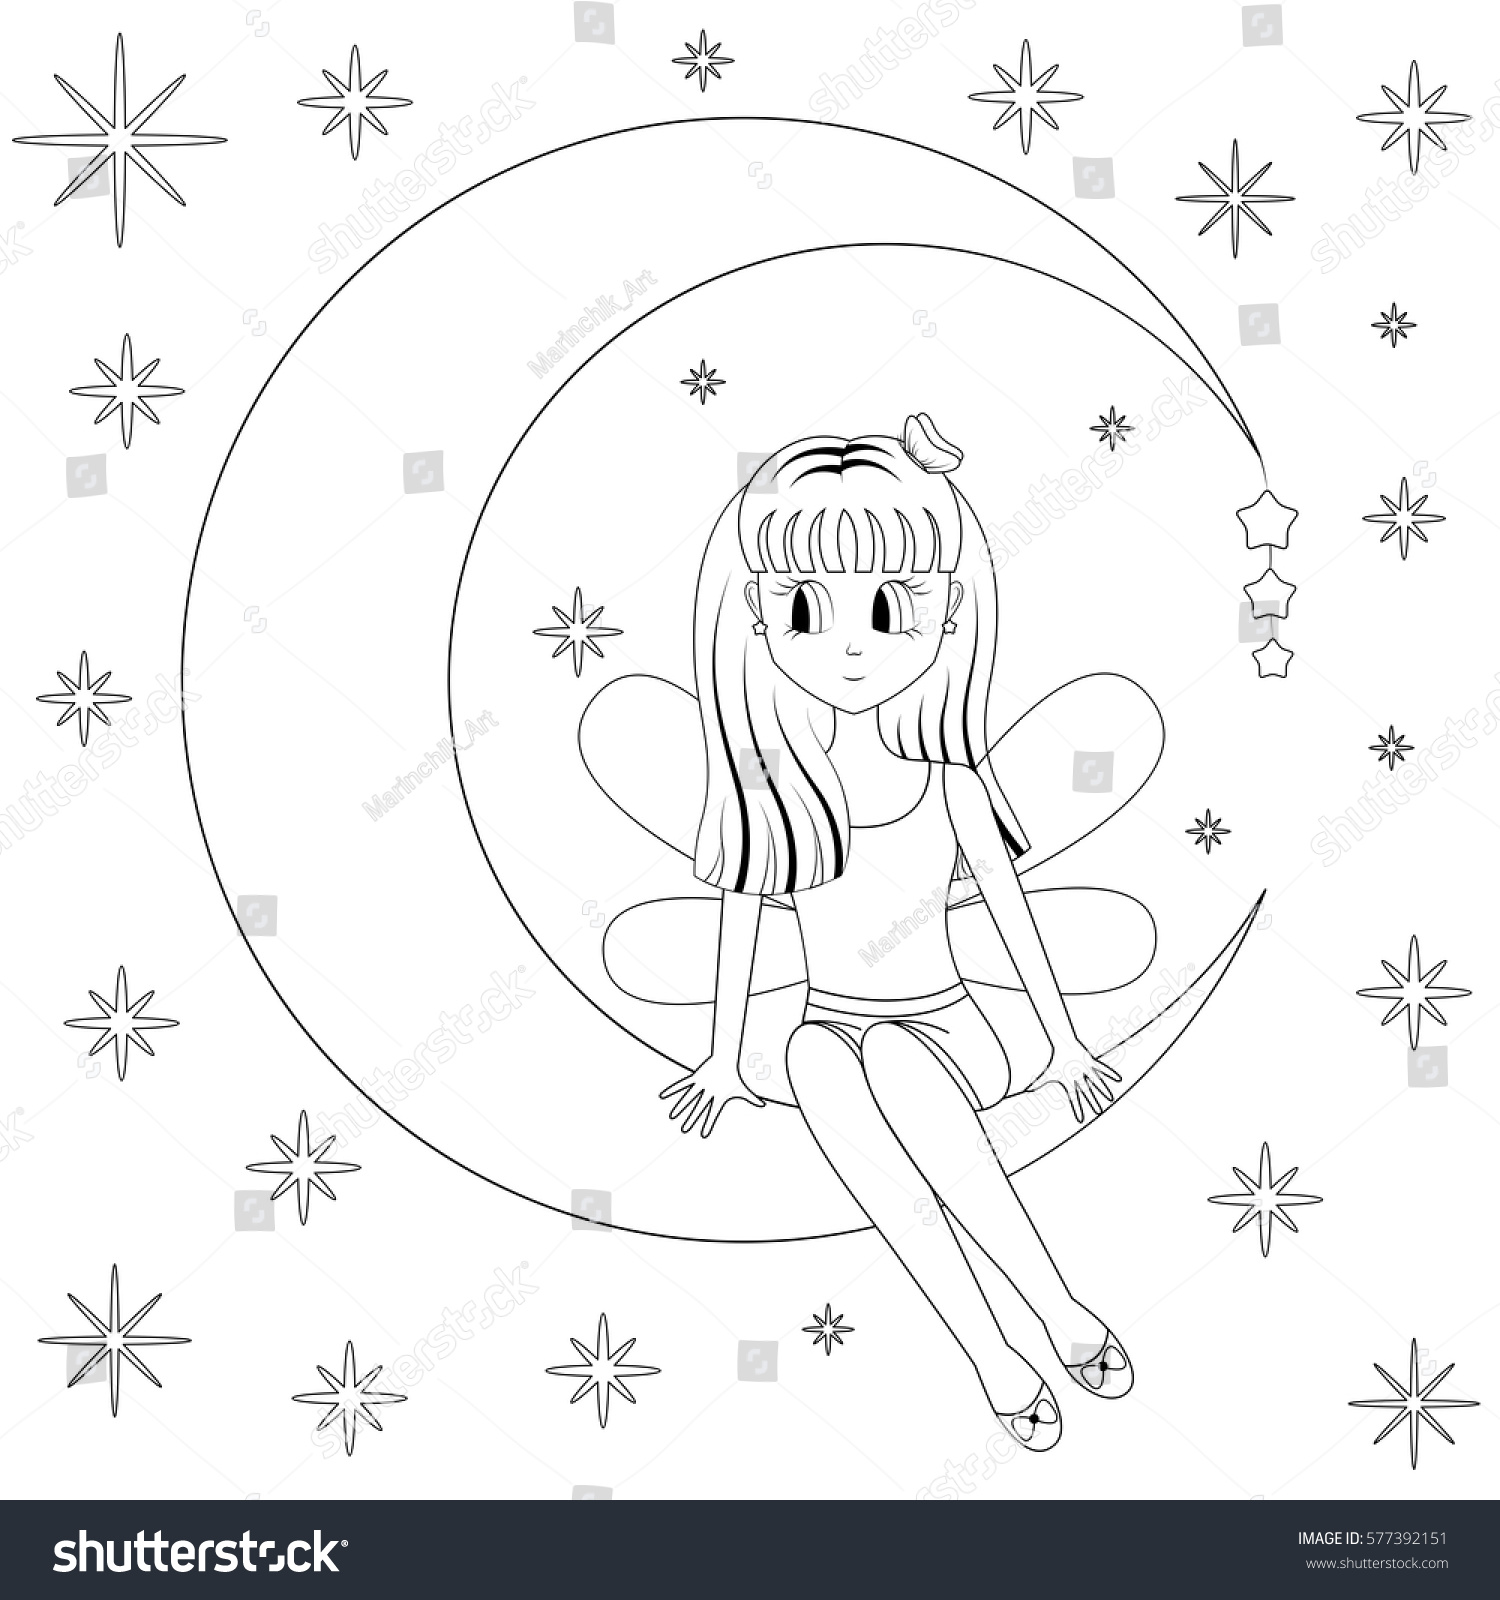 SVG of Cute girl sitting on the Moon on background night starry sky. Cartoon style. Vector illustration isolated on white for coloring book. EPS10. svg